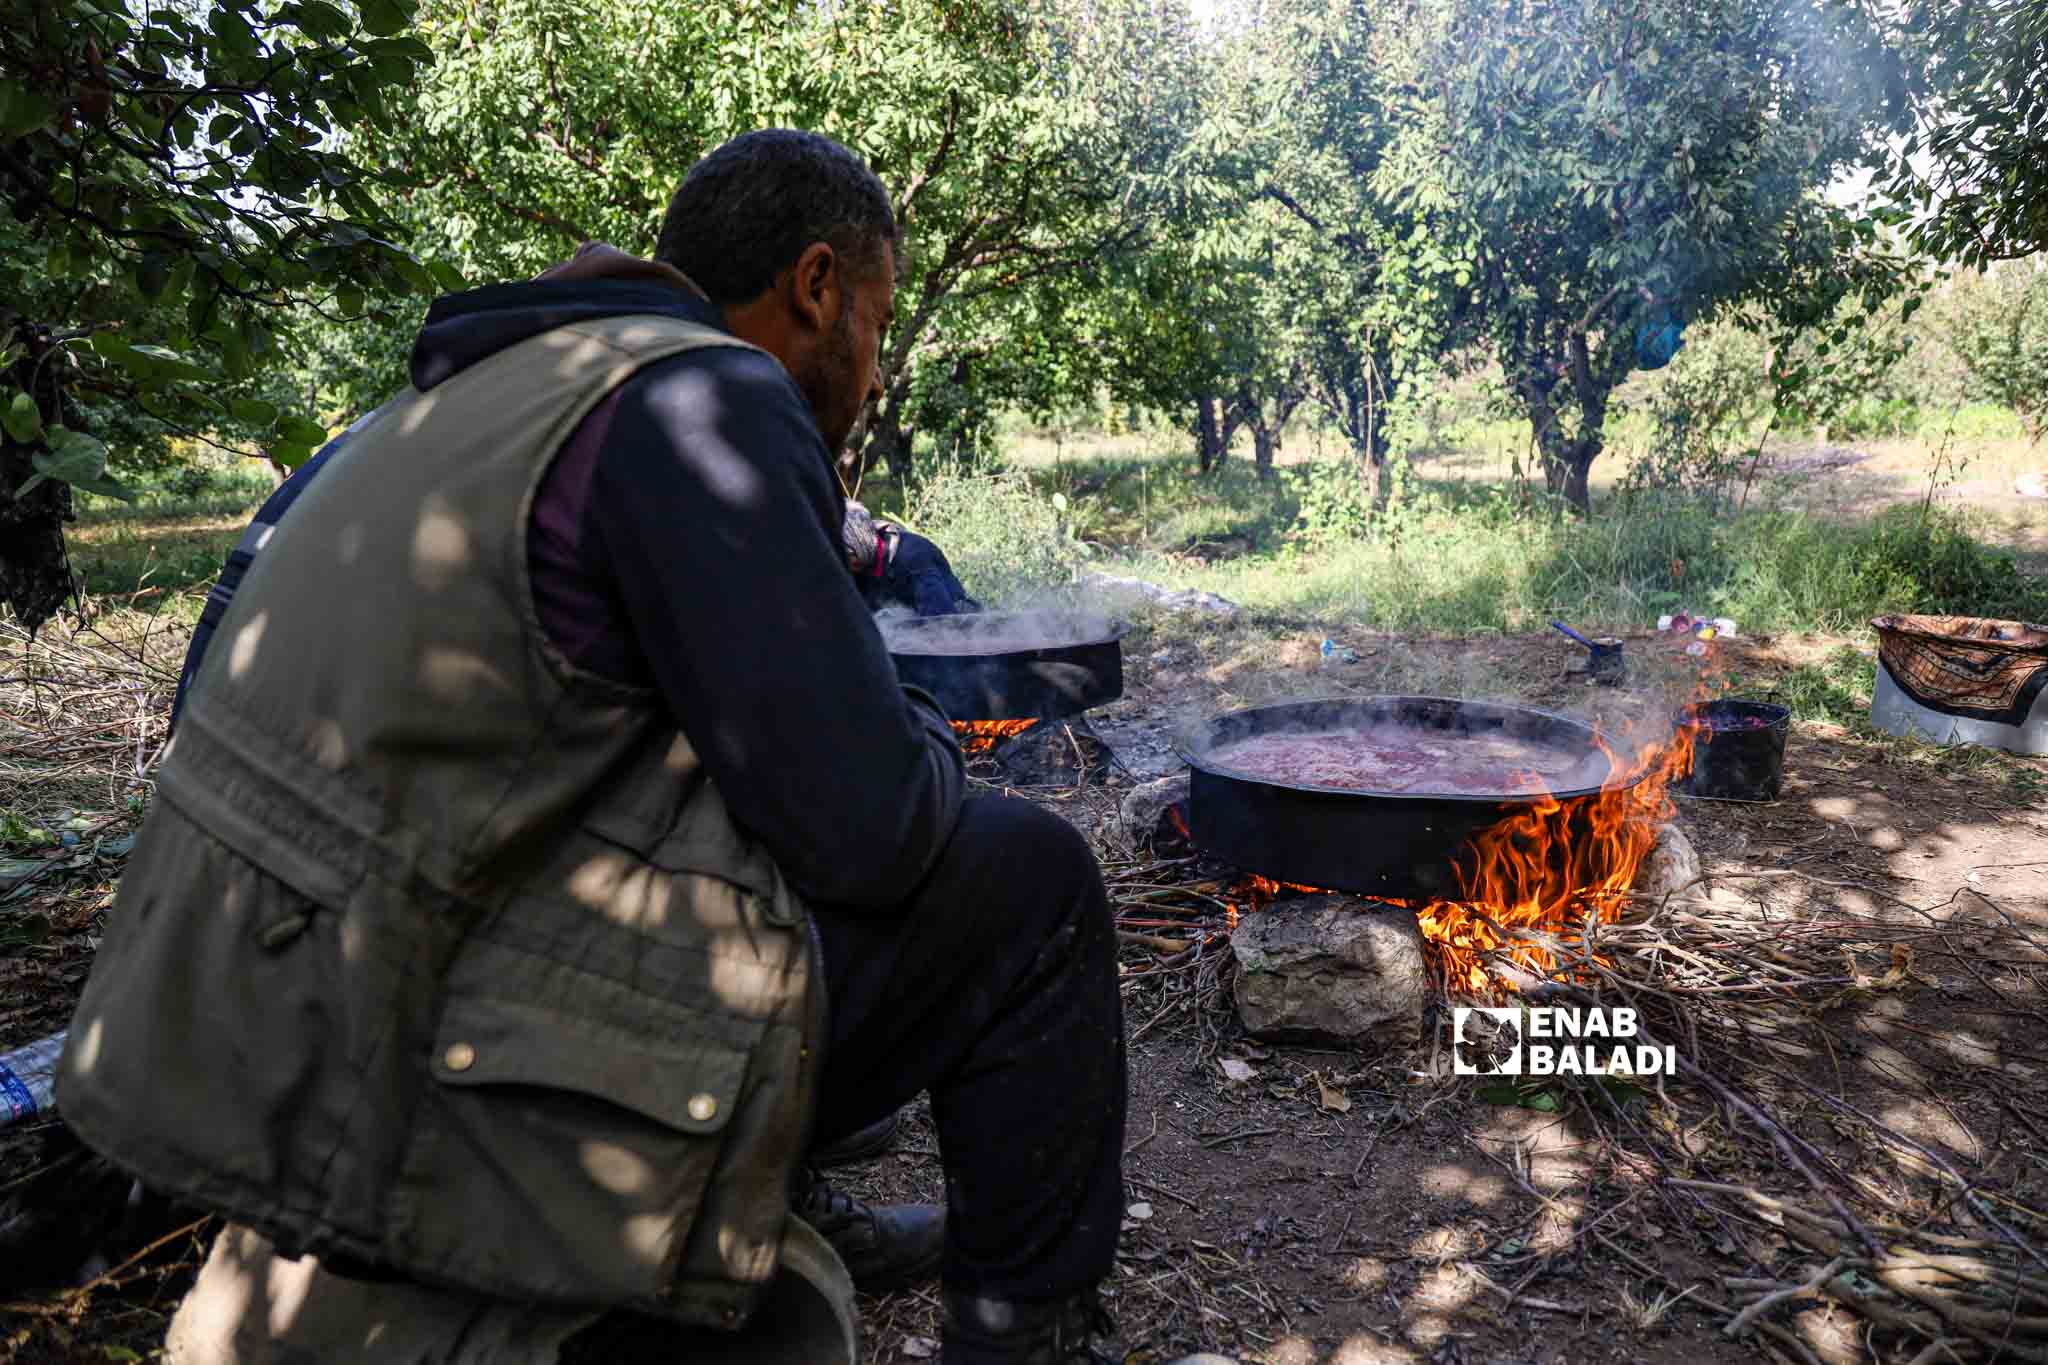 Farmers squeeze pomegranates and boil the juice in the traditional way to use later in the making of molasses in Basoutah village in Afrin region, Aleppo countryside - 18 October 2022 (Enab Baladi / Amir Kharboutli)
